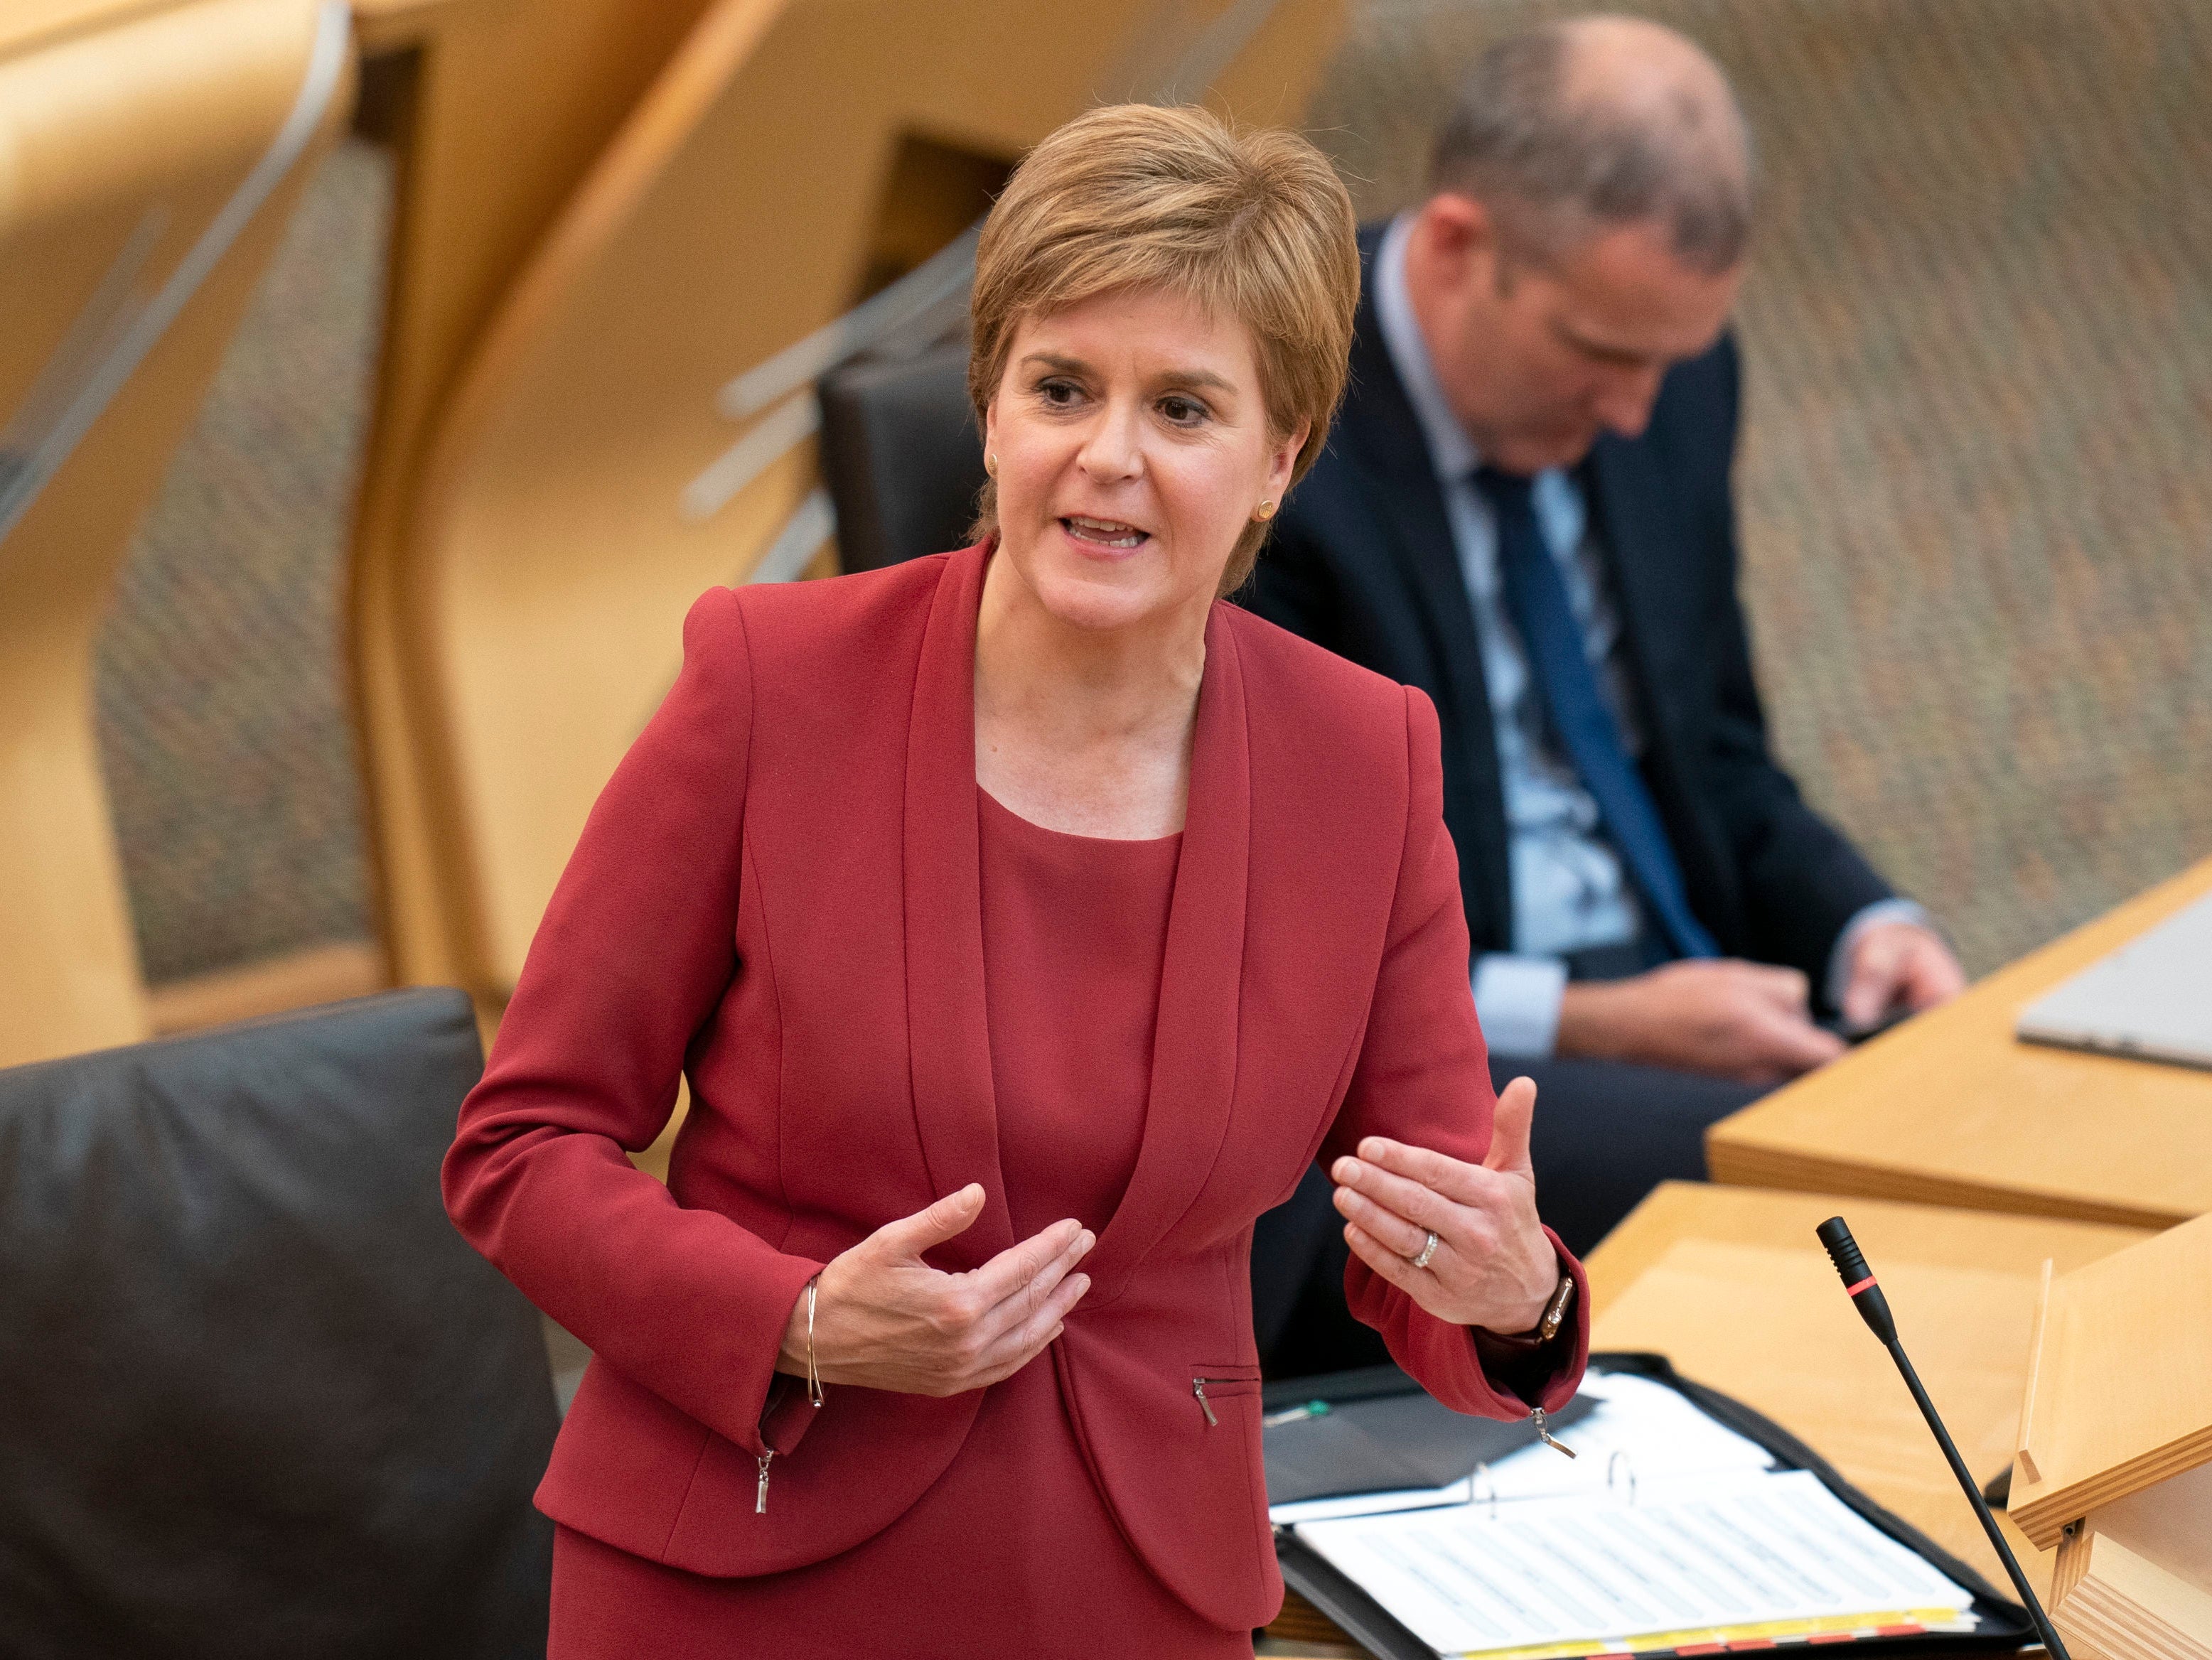 Nicola Sturgeon told the Scottish parliament on Tuesday that the SNP and the Greens would work together on independence, climate change and Brexit